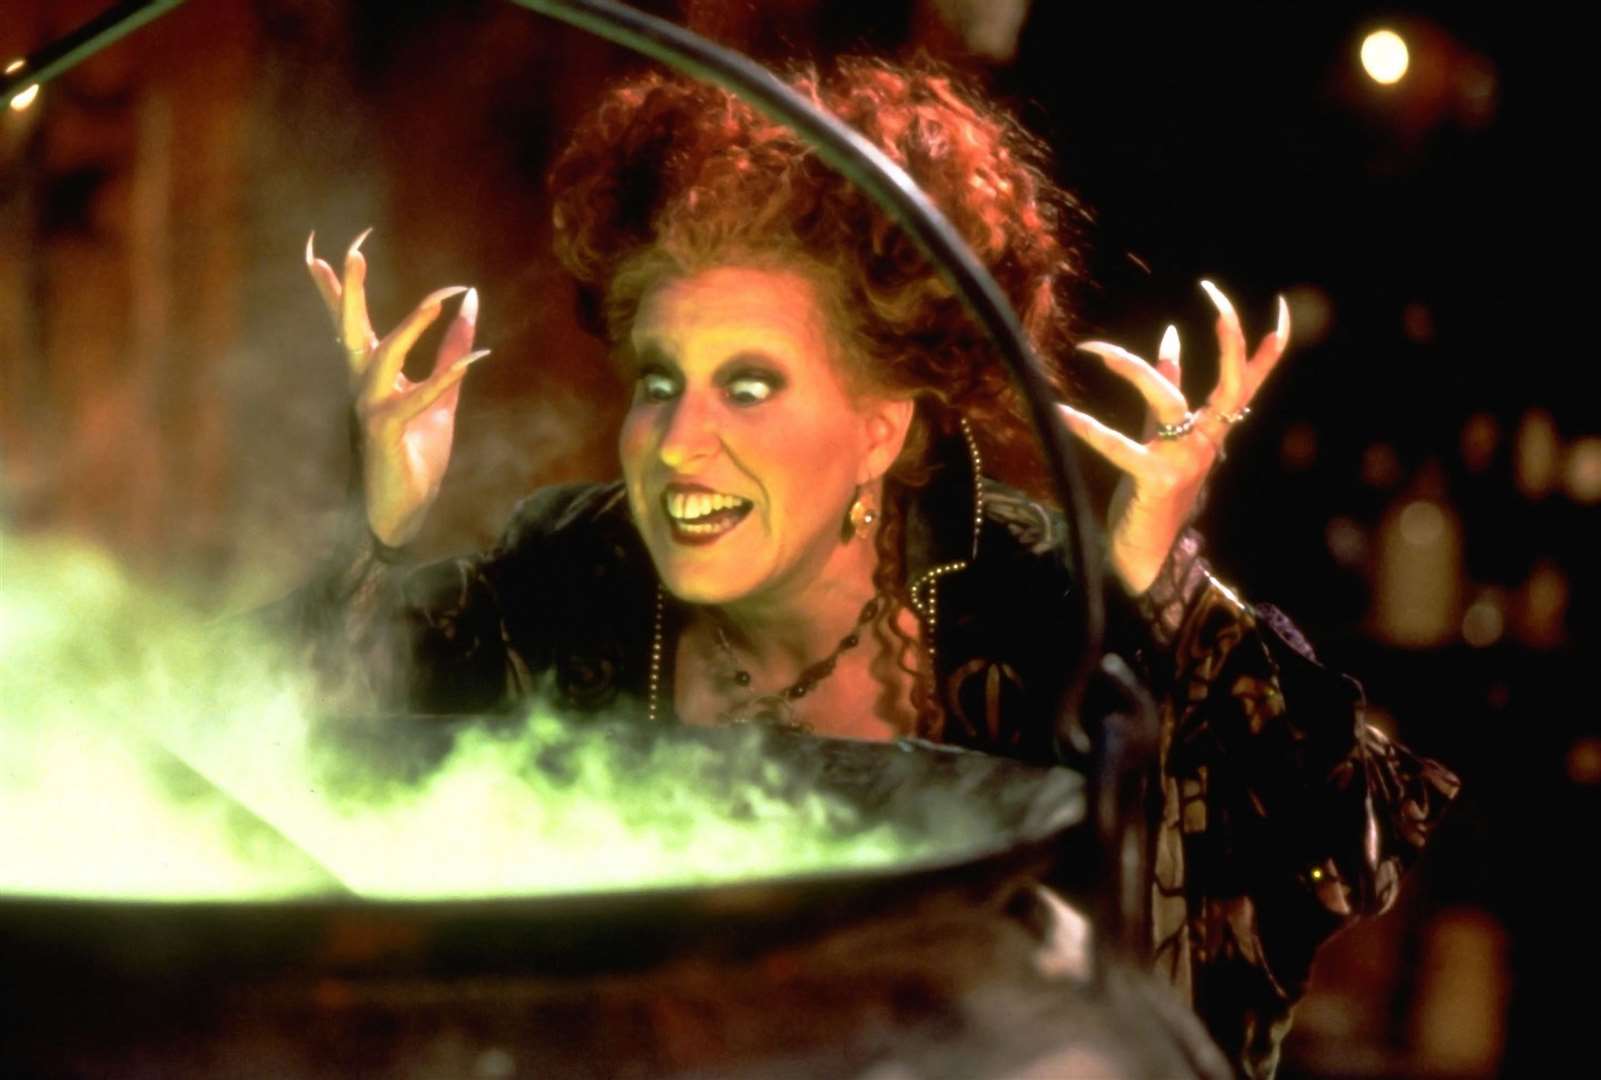 Hocus Pocus is returning to cinema screens to celebrate its 30th anniversary